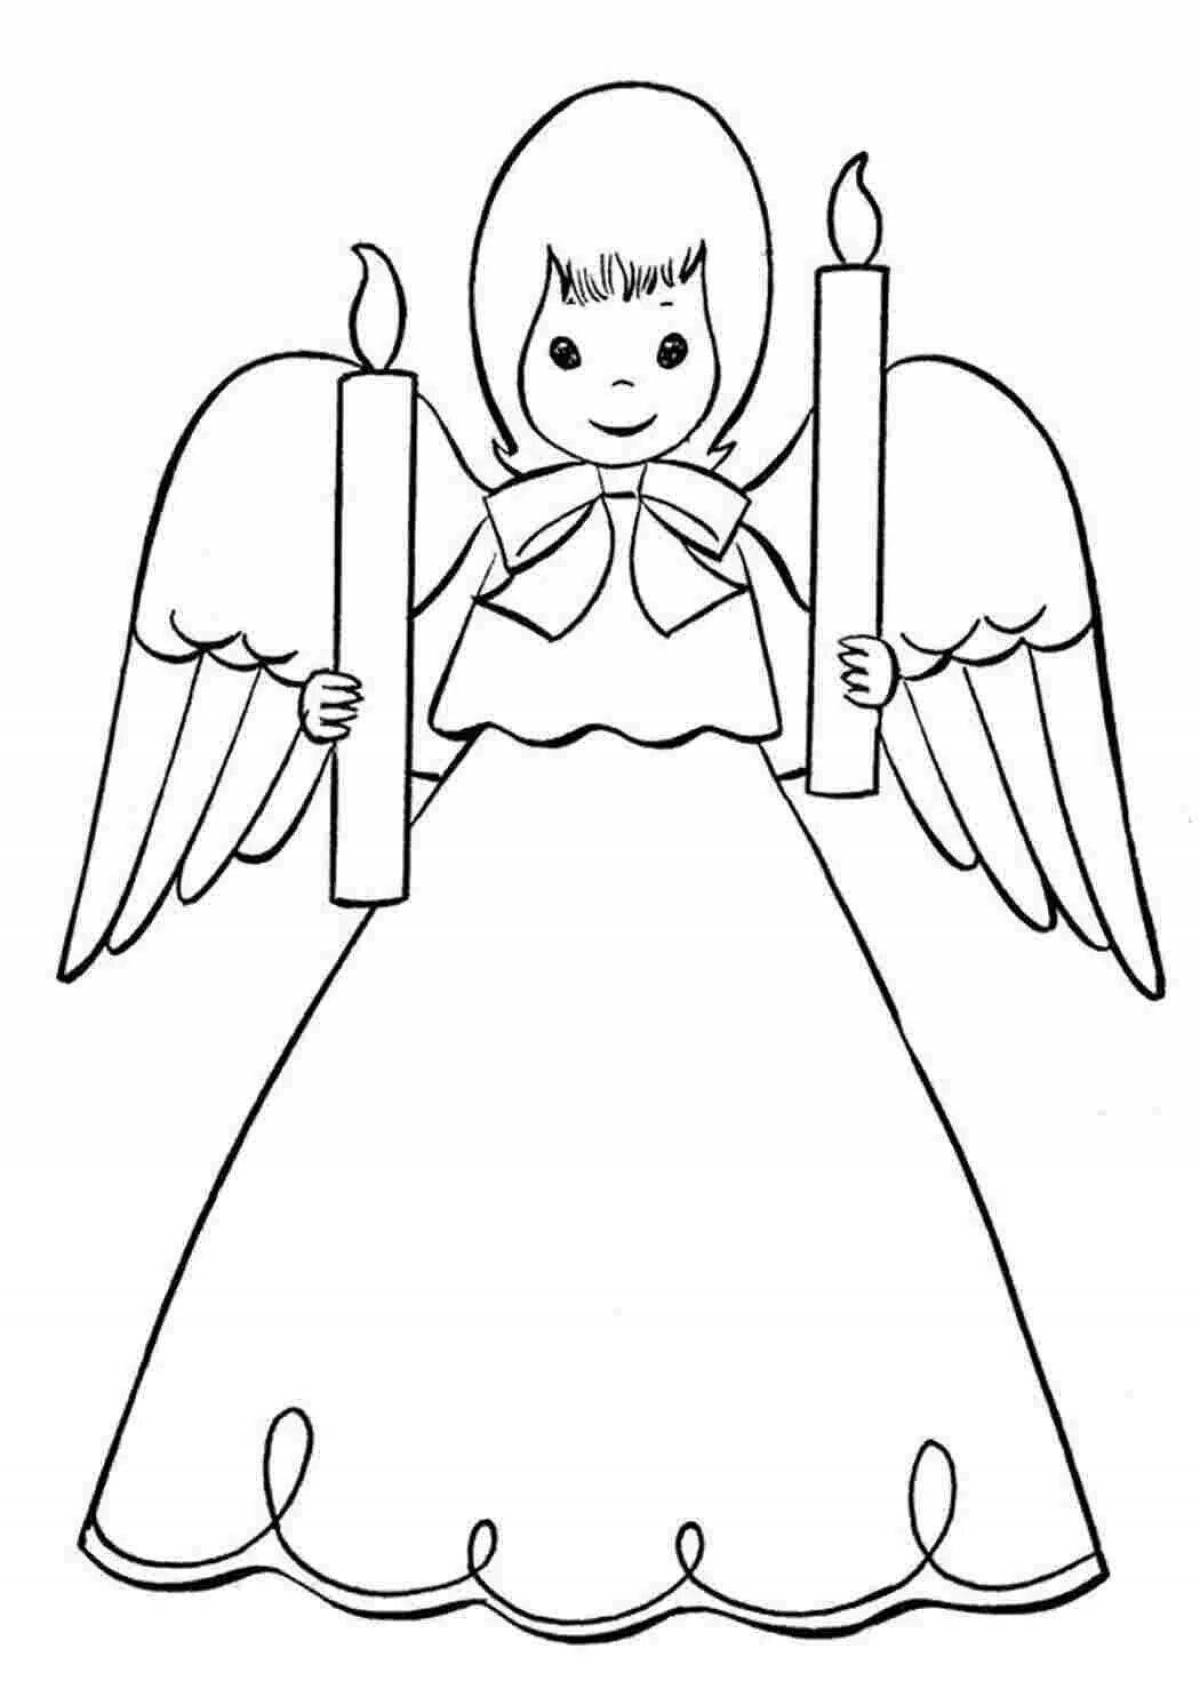 Glowing angel with wings coloring book for kids